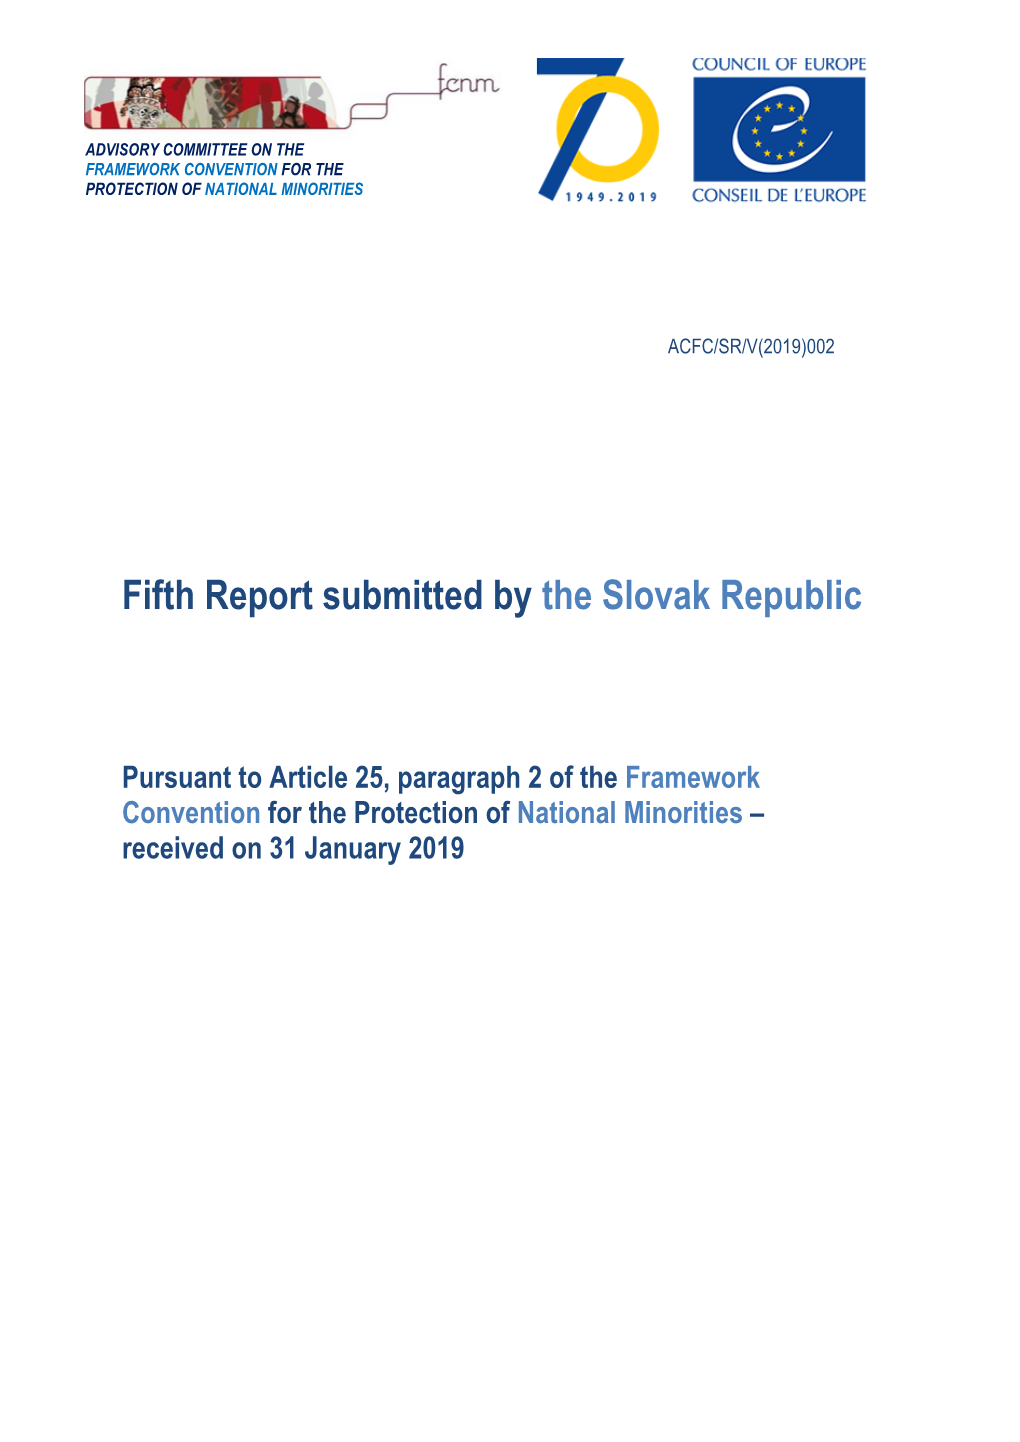 Fifth Report Submitted by the Slovak Republic